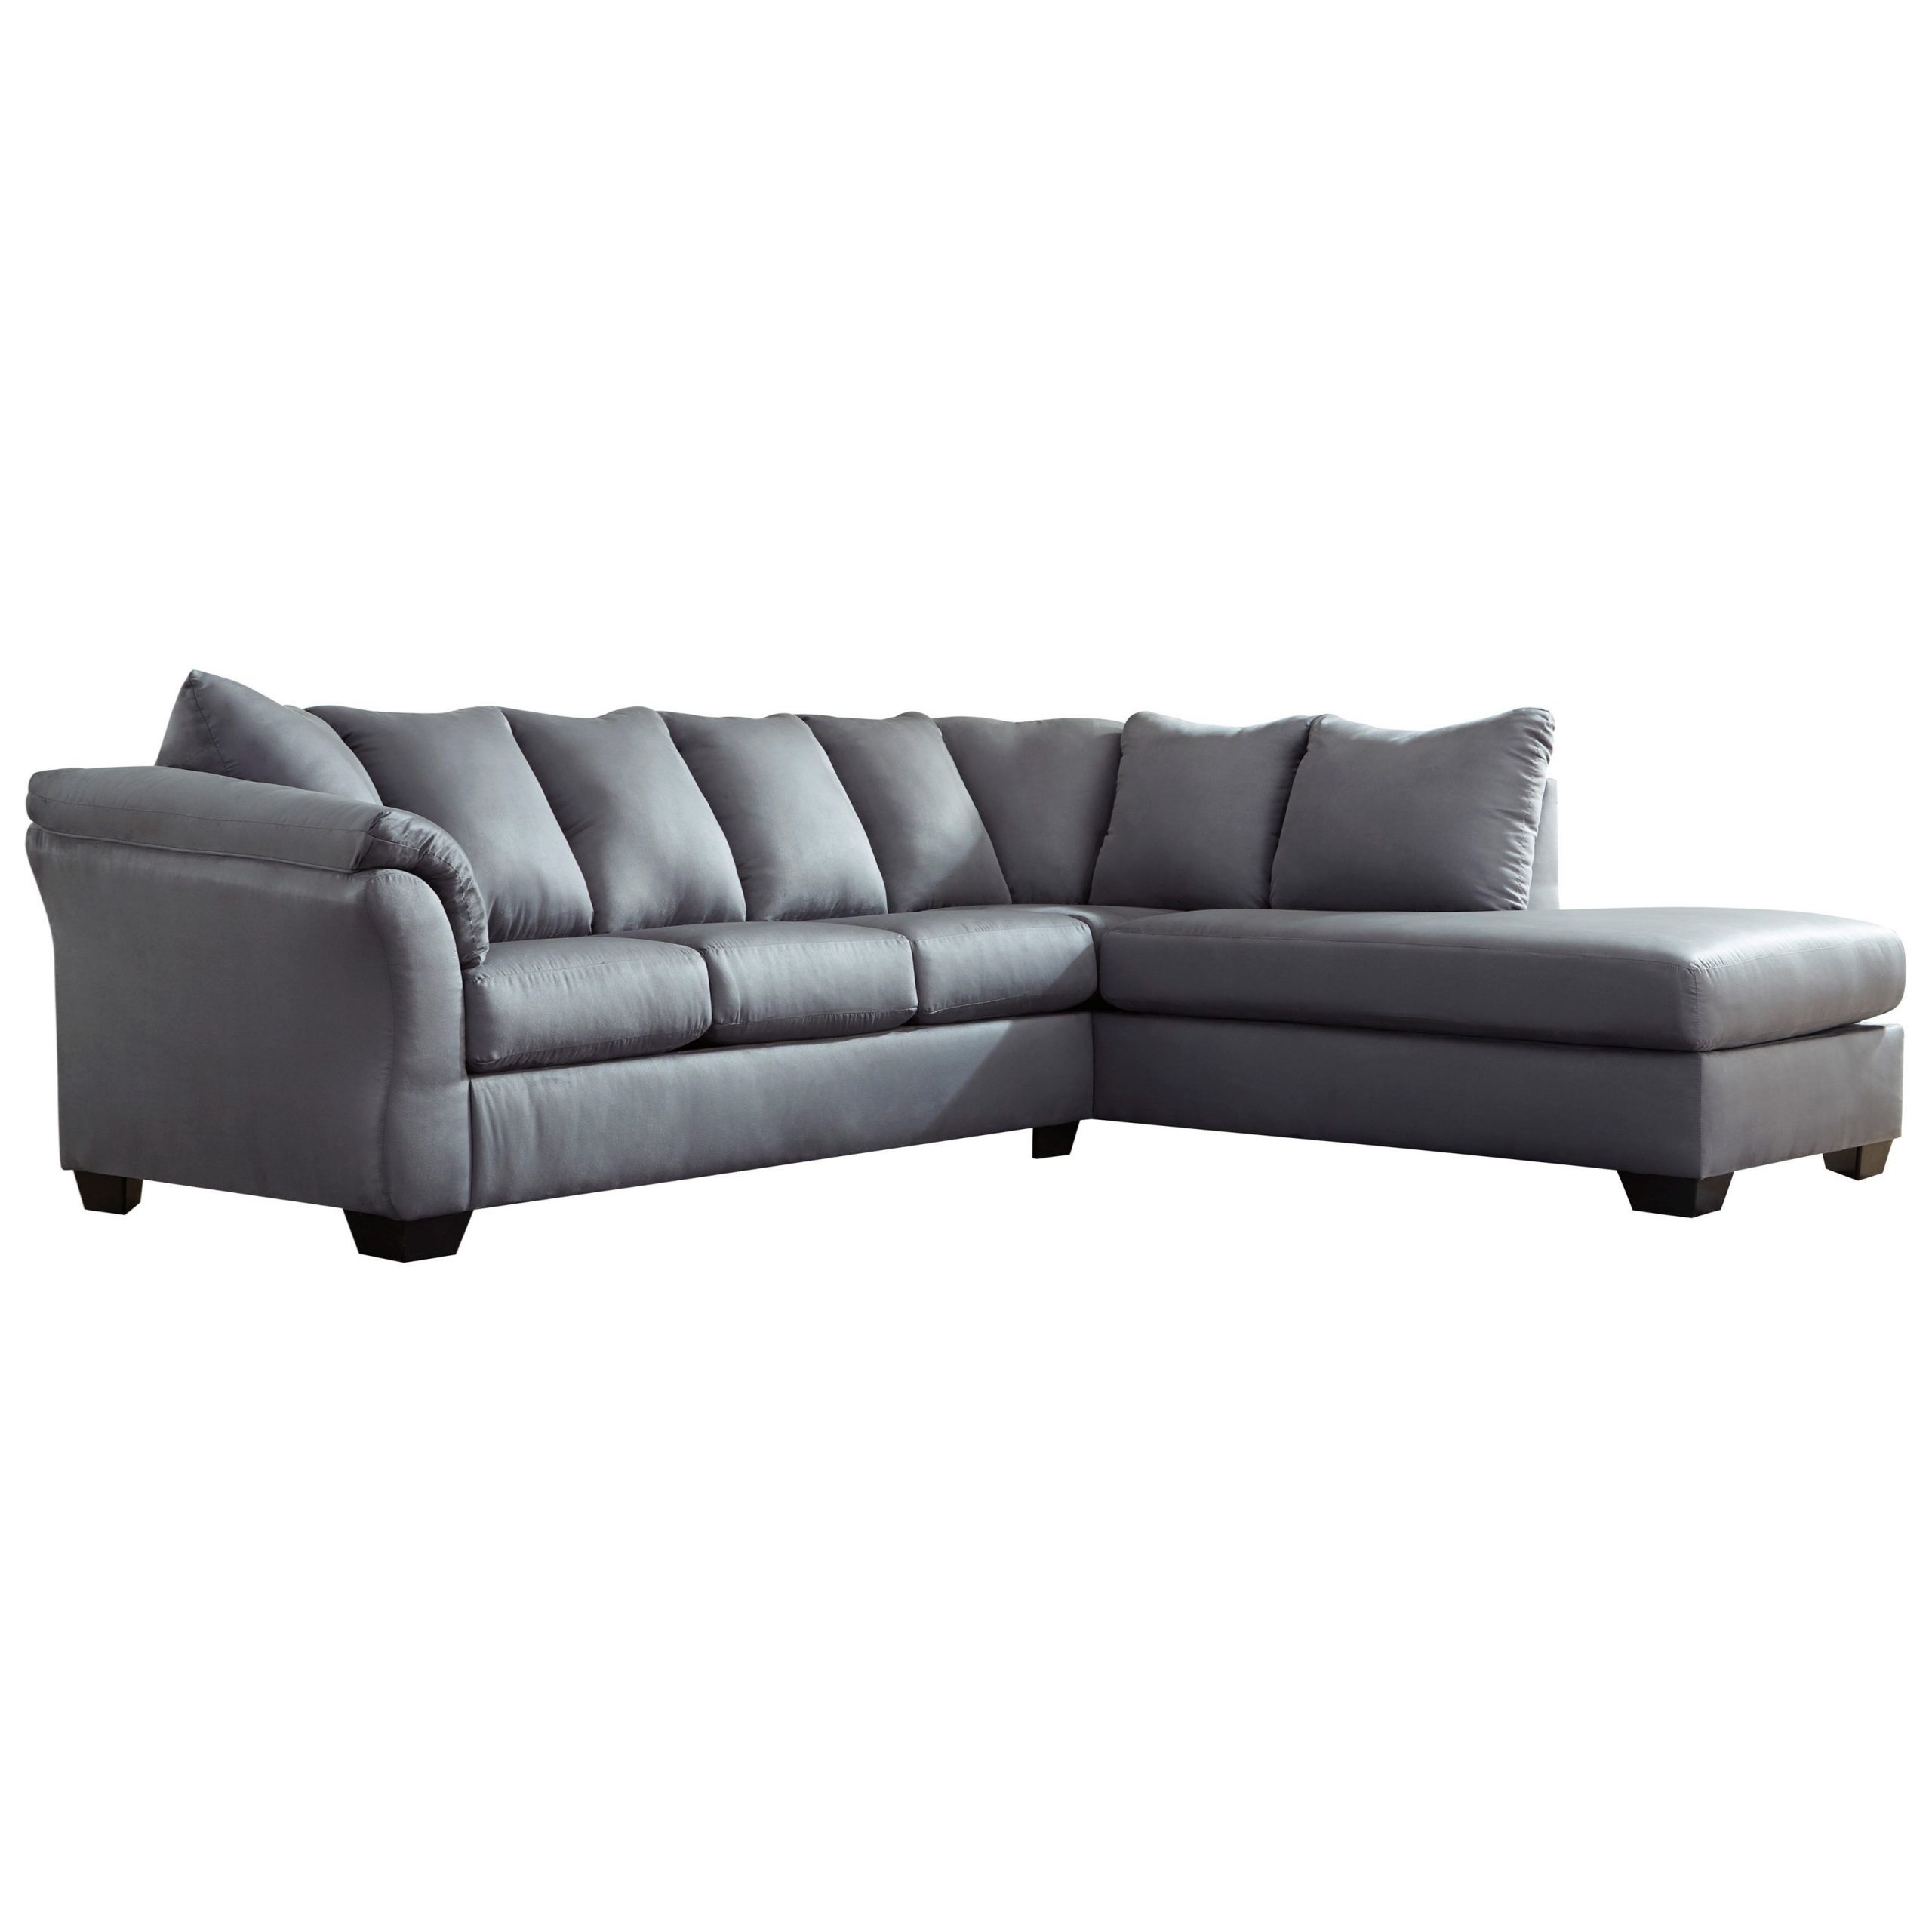 Fashionable Signature Designashley Darcy – Steel Contemporary 2 With Regard To 2pc Burland Contemporary Chaise Sectional Sofas (View 4 of 25)